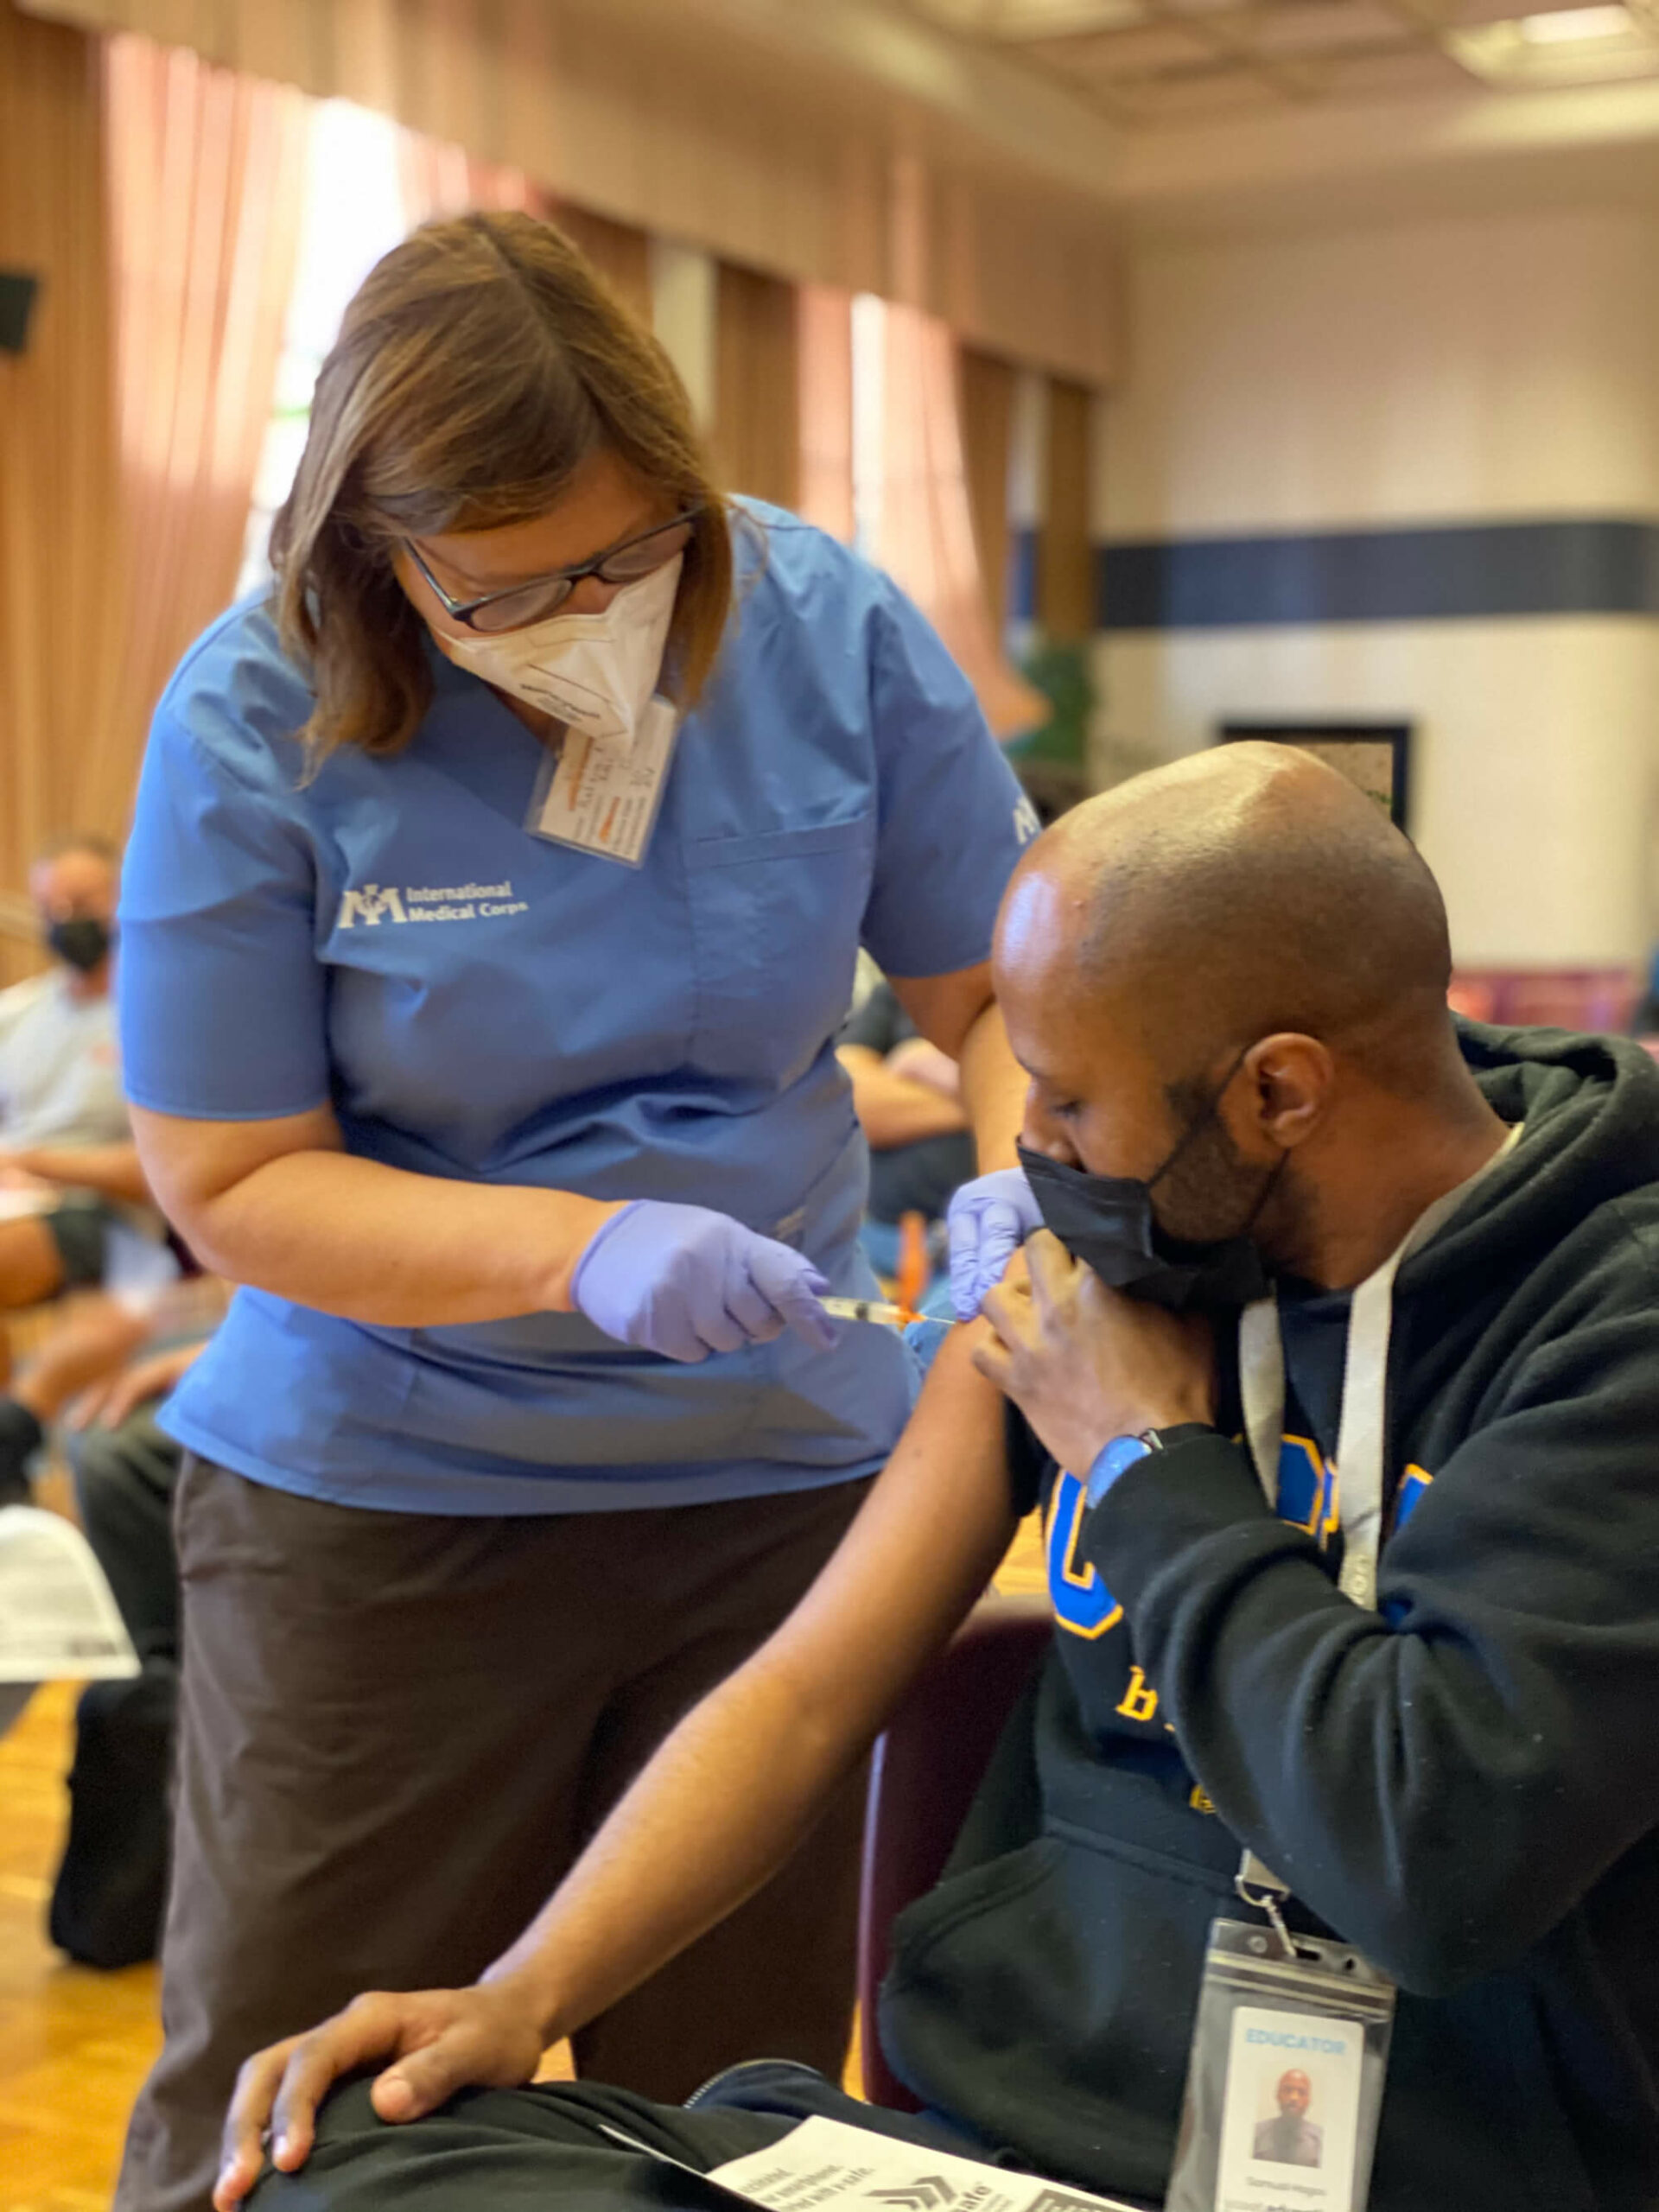 We are supporting vaccination efforts at Martin Luther King, Jr. Community Hospital and at Kedren Community Health Center, both of which serve vulnerable populations in Central and South Los Angeles.